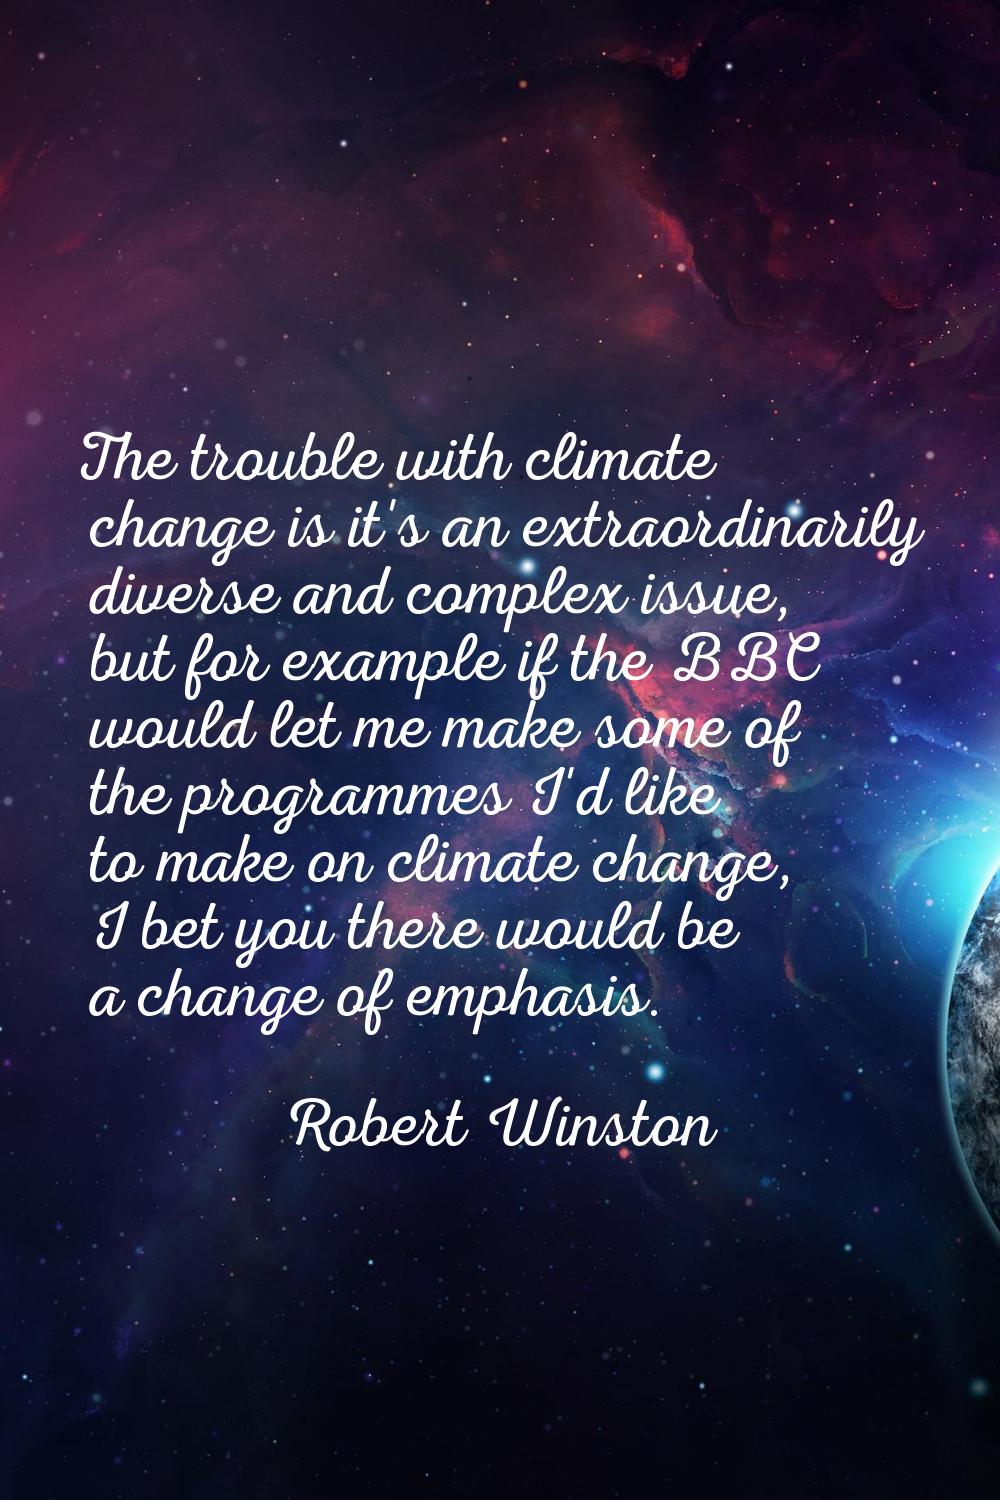 The trouble with climate change is it's an extraordinarily diverse and complex issue, but for examp